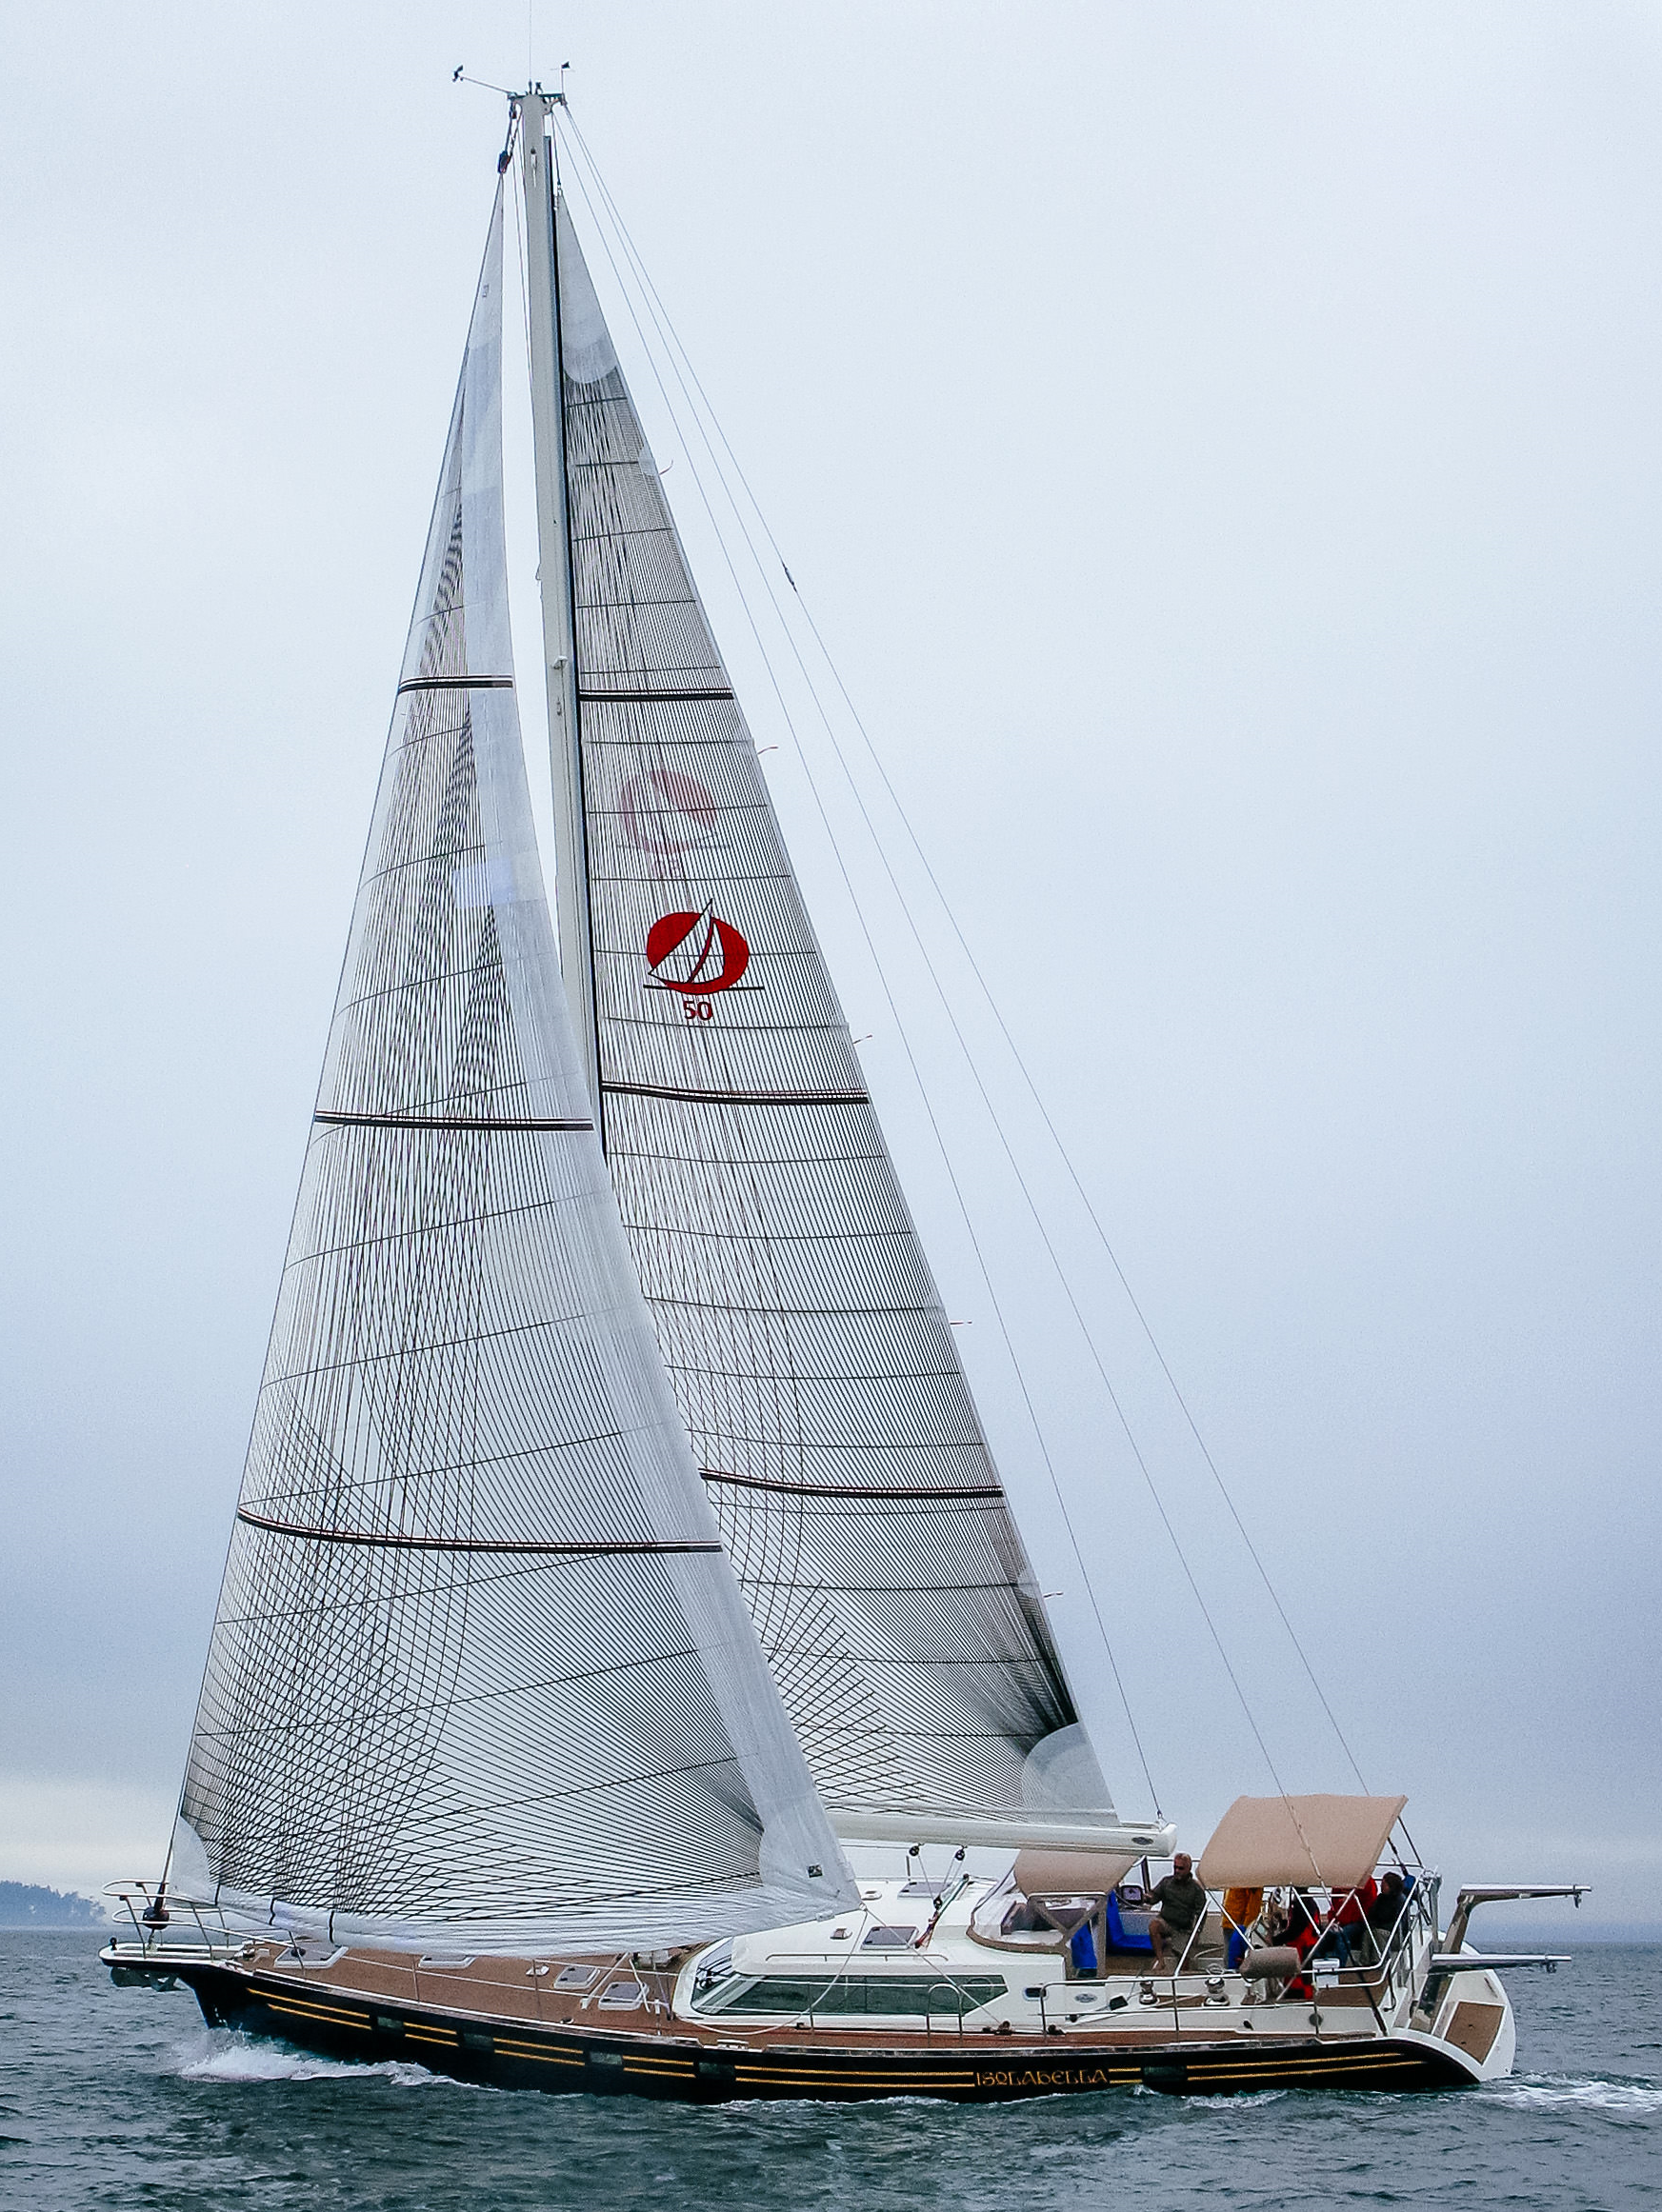 A Waterline Yachts 50 with Tape-Drive carbon Spectra performance cruising roller-reefing genoa and mainsail. Notice the 3 reef points that include sets of tapes to carry the reefed luff loads.